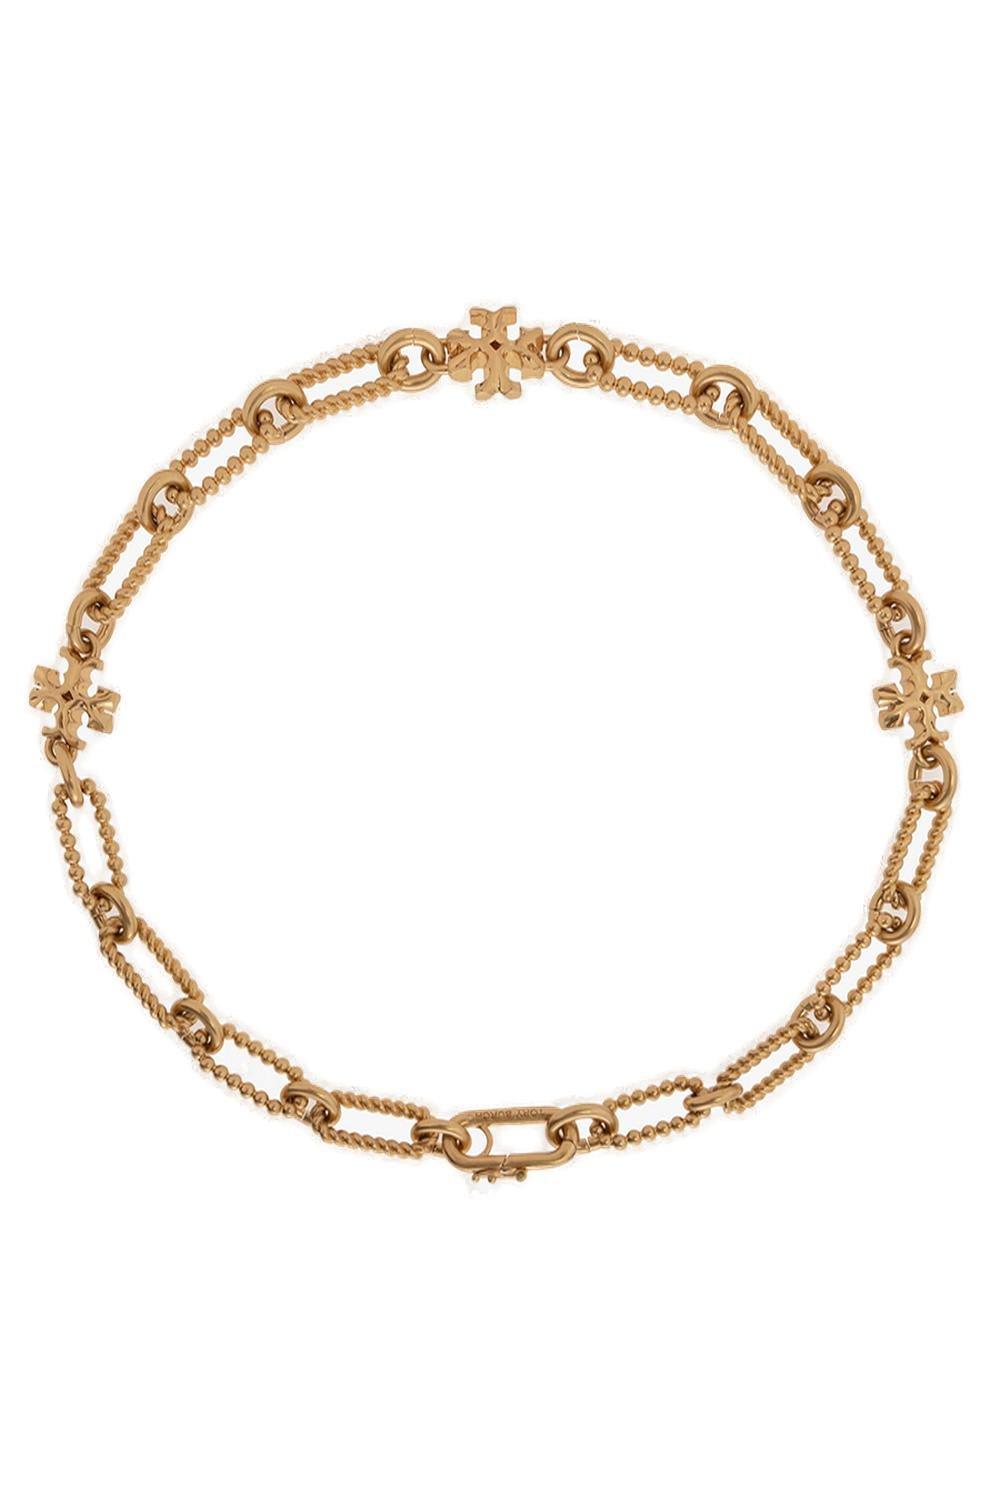 Tory Burch Roxanne Chained Short Necklace